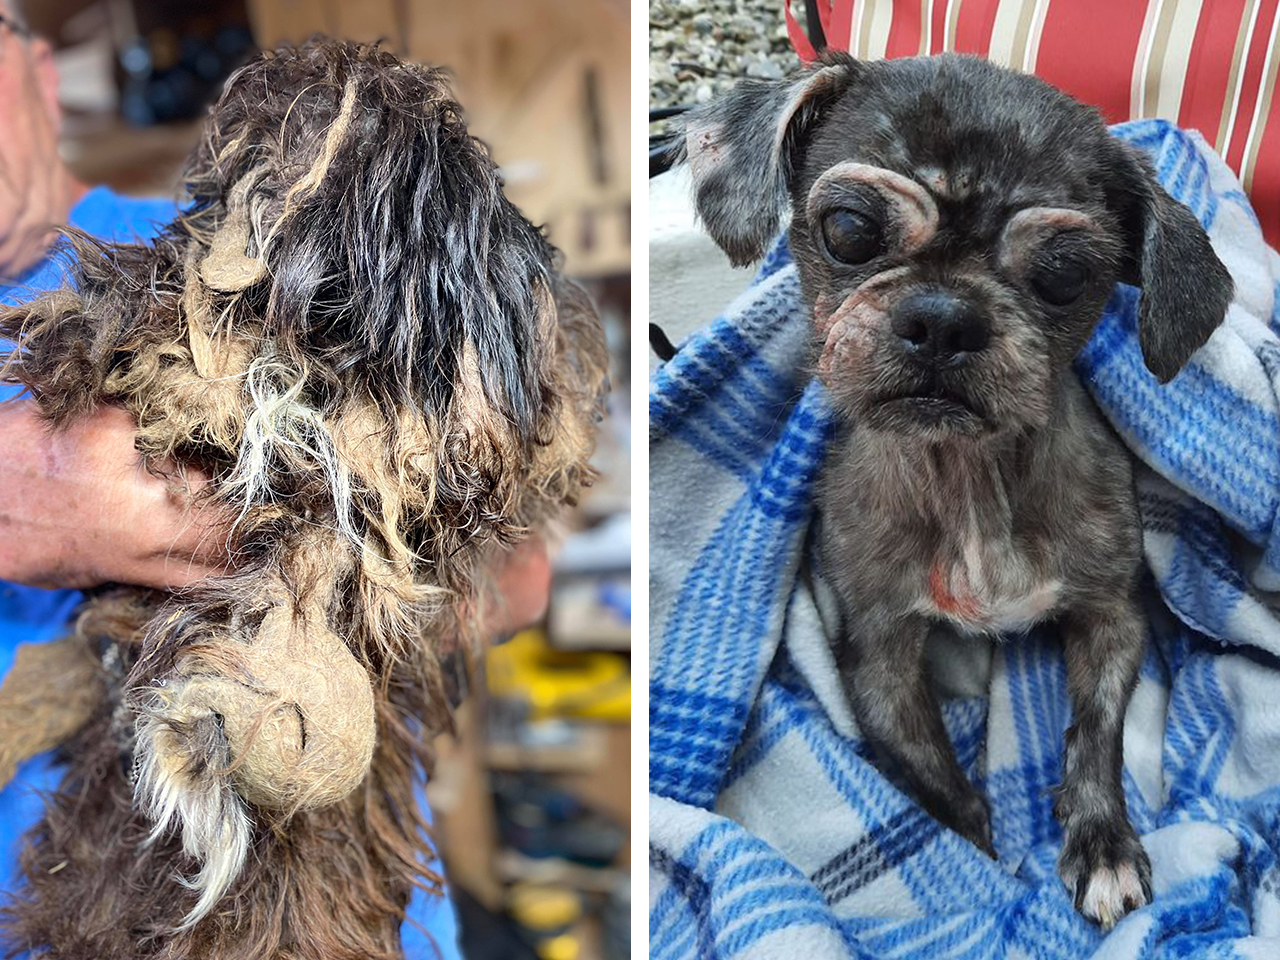 Oliver was rescued after suffering from severe neglect. He was in such bad shape his poor little eyes were matted open. After a proper grooming, things started looking up for Oliver, and he was placed with a loving family who proclaims him ‘the sweetest dog alive!’ Oliver is finally living his best life.